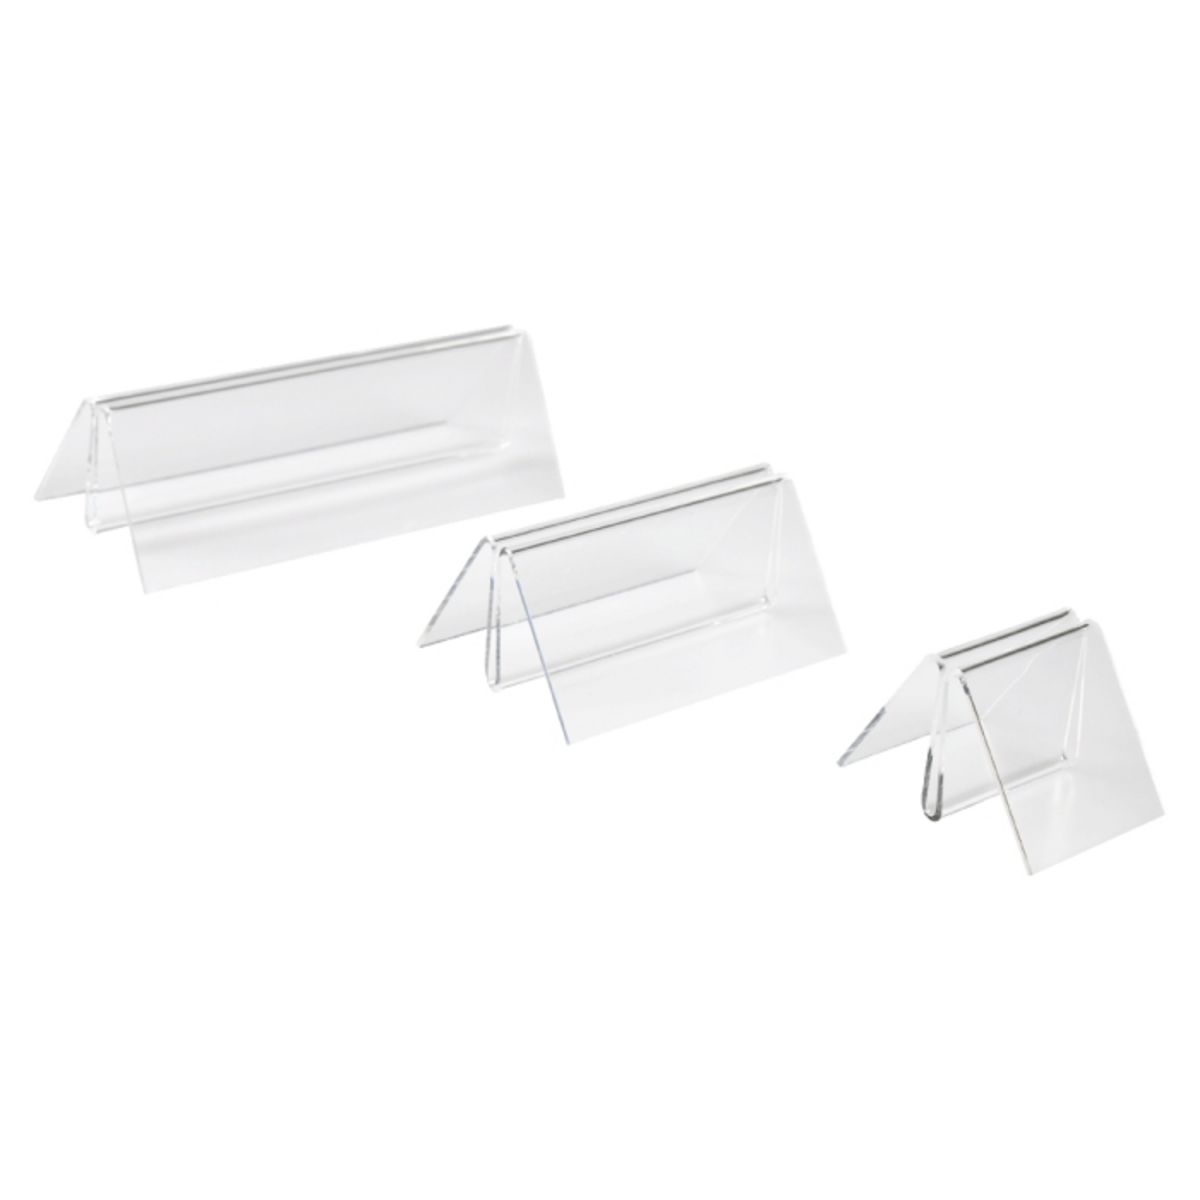 Plastic menu holder bases in three sizes.png